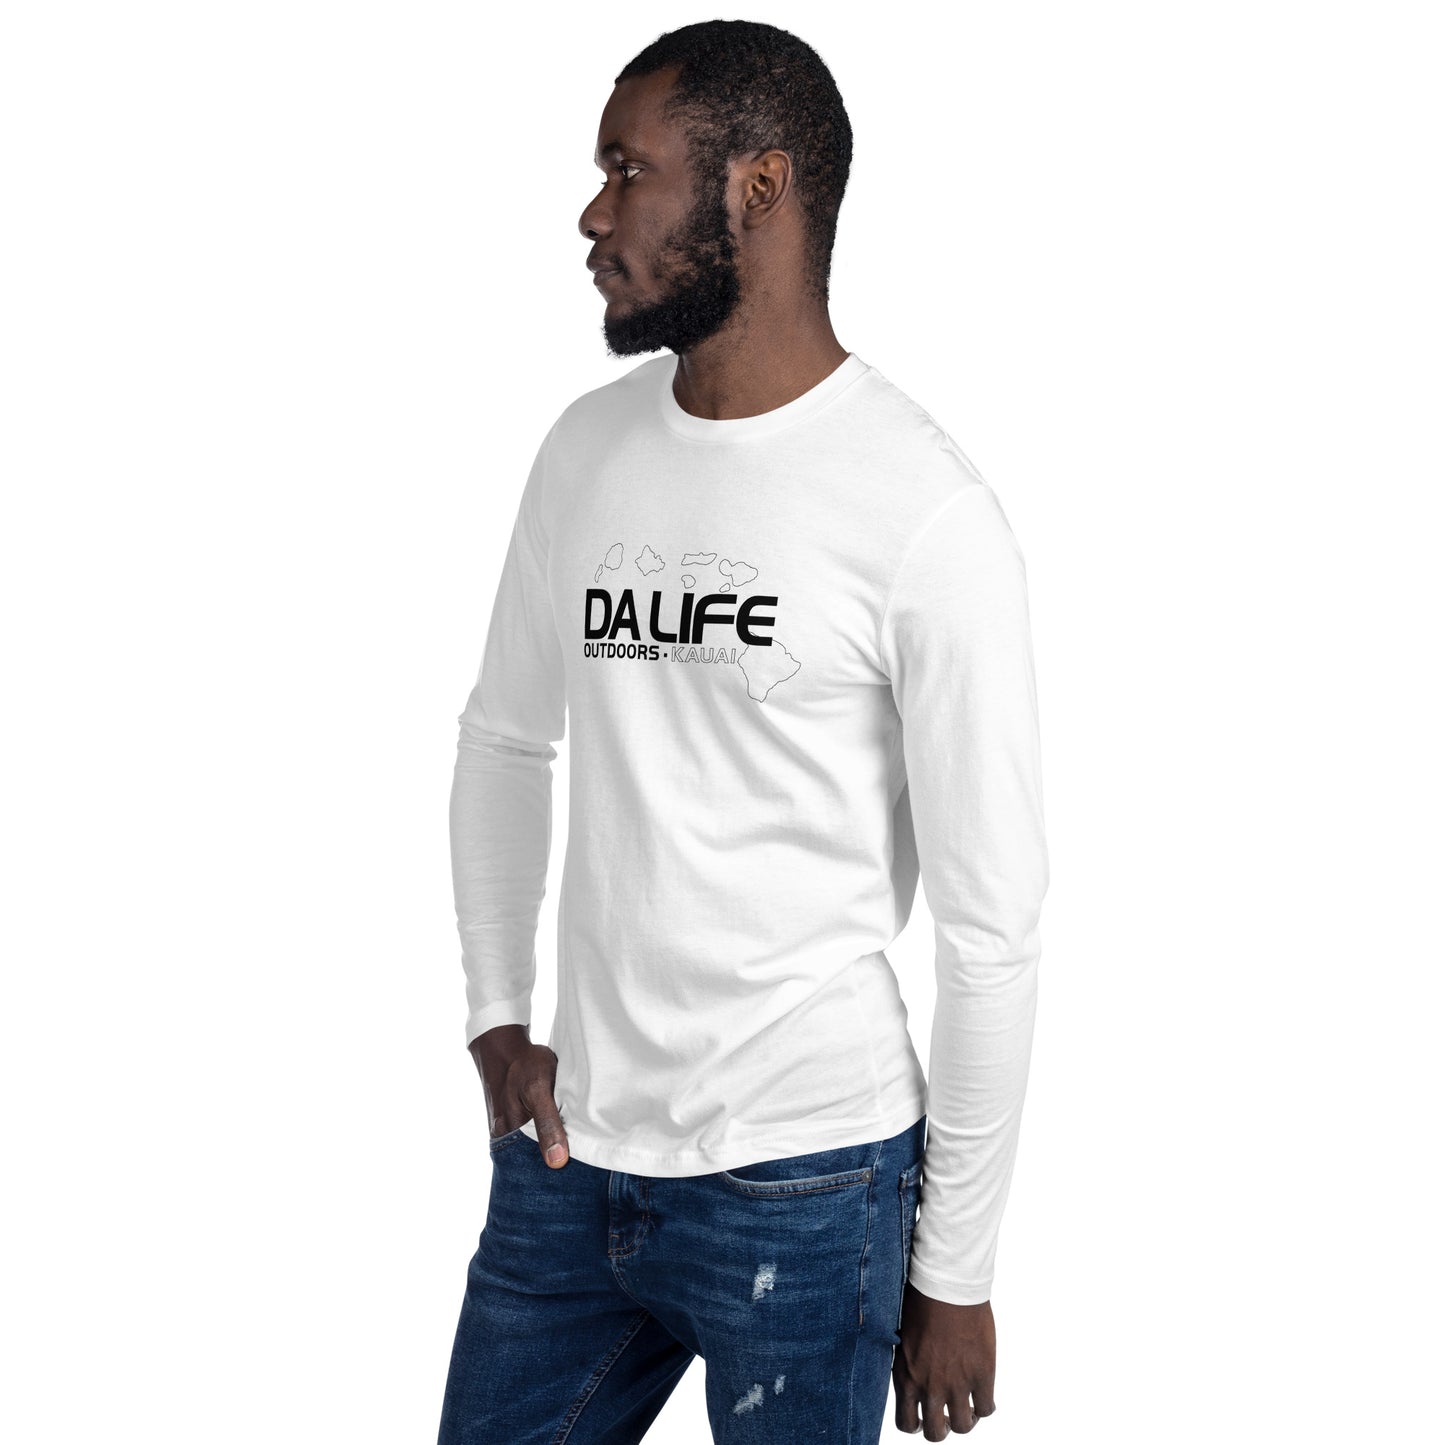 Waterfall Rappel Long Sleeve Fitted Crew